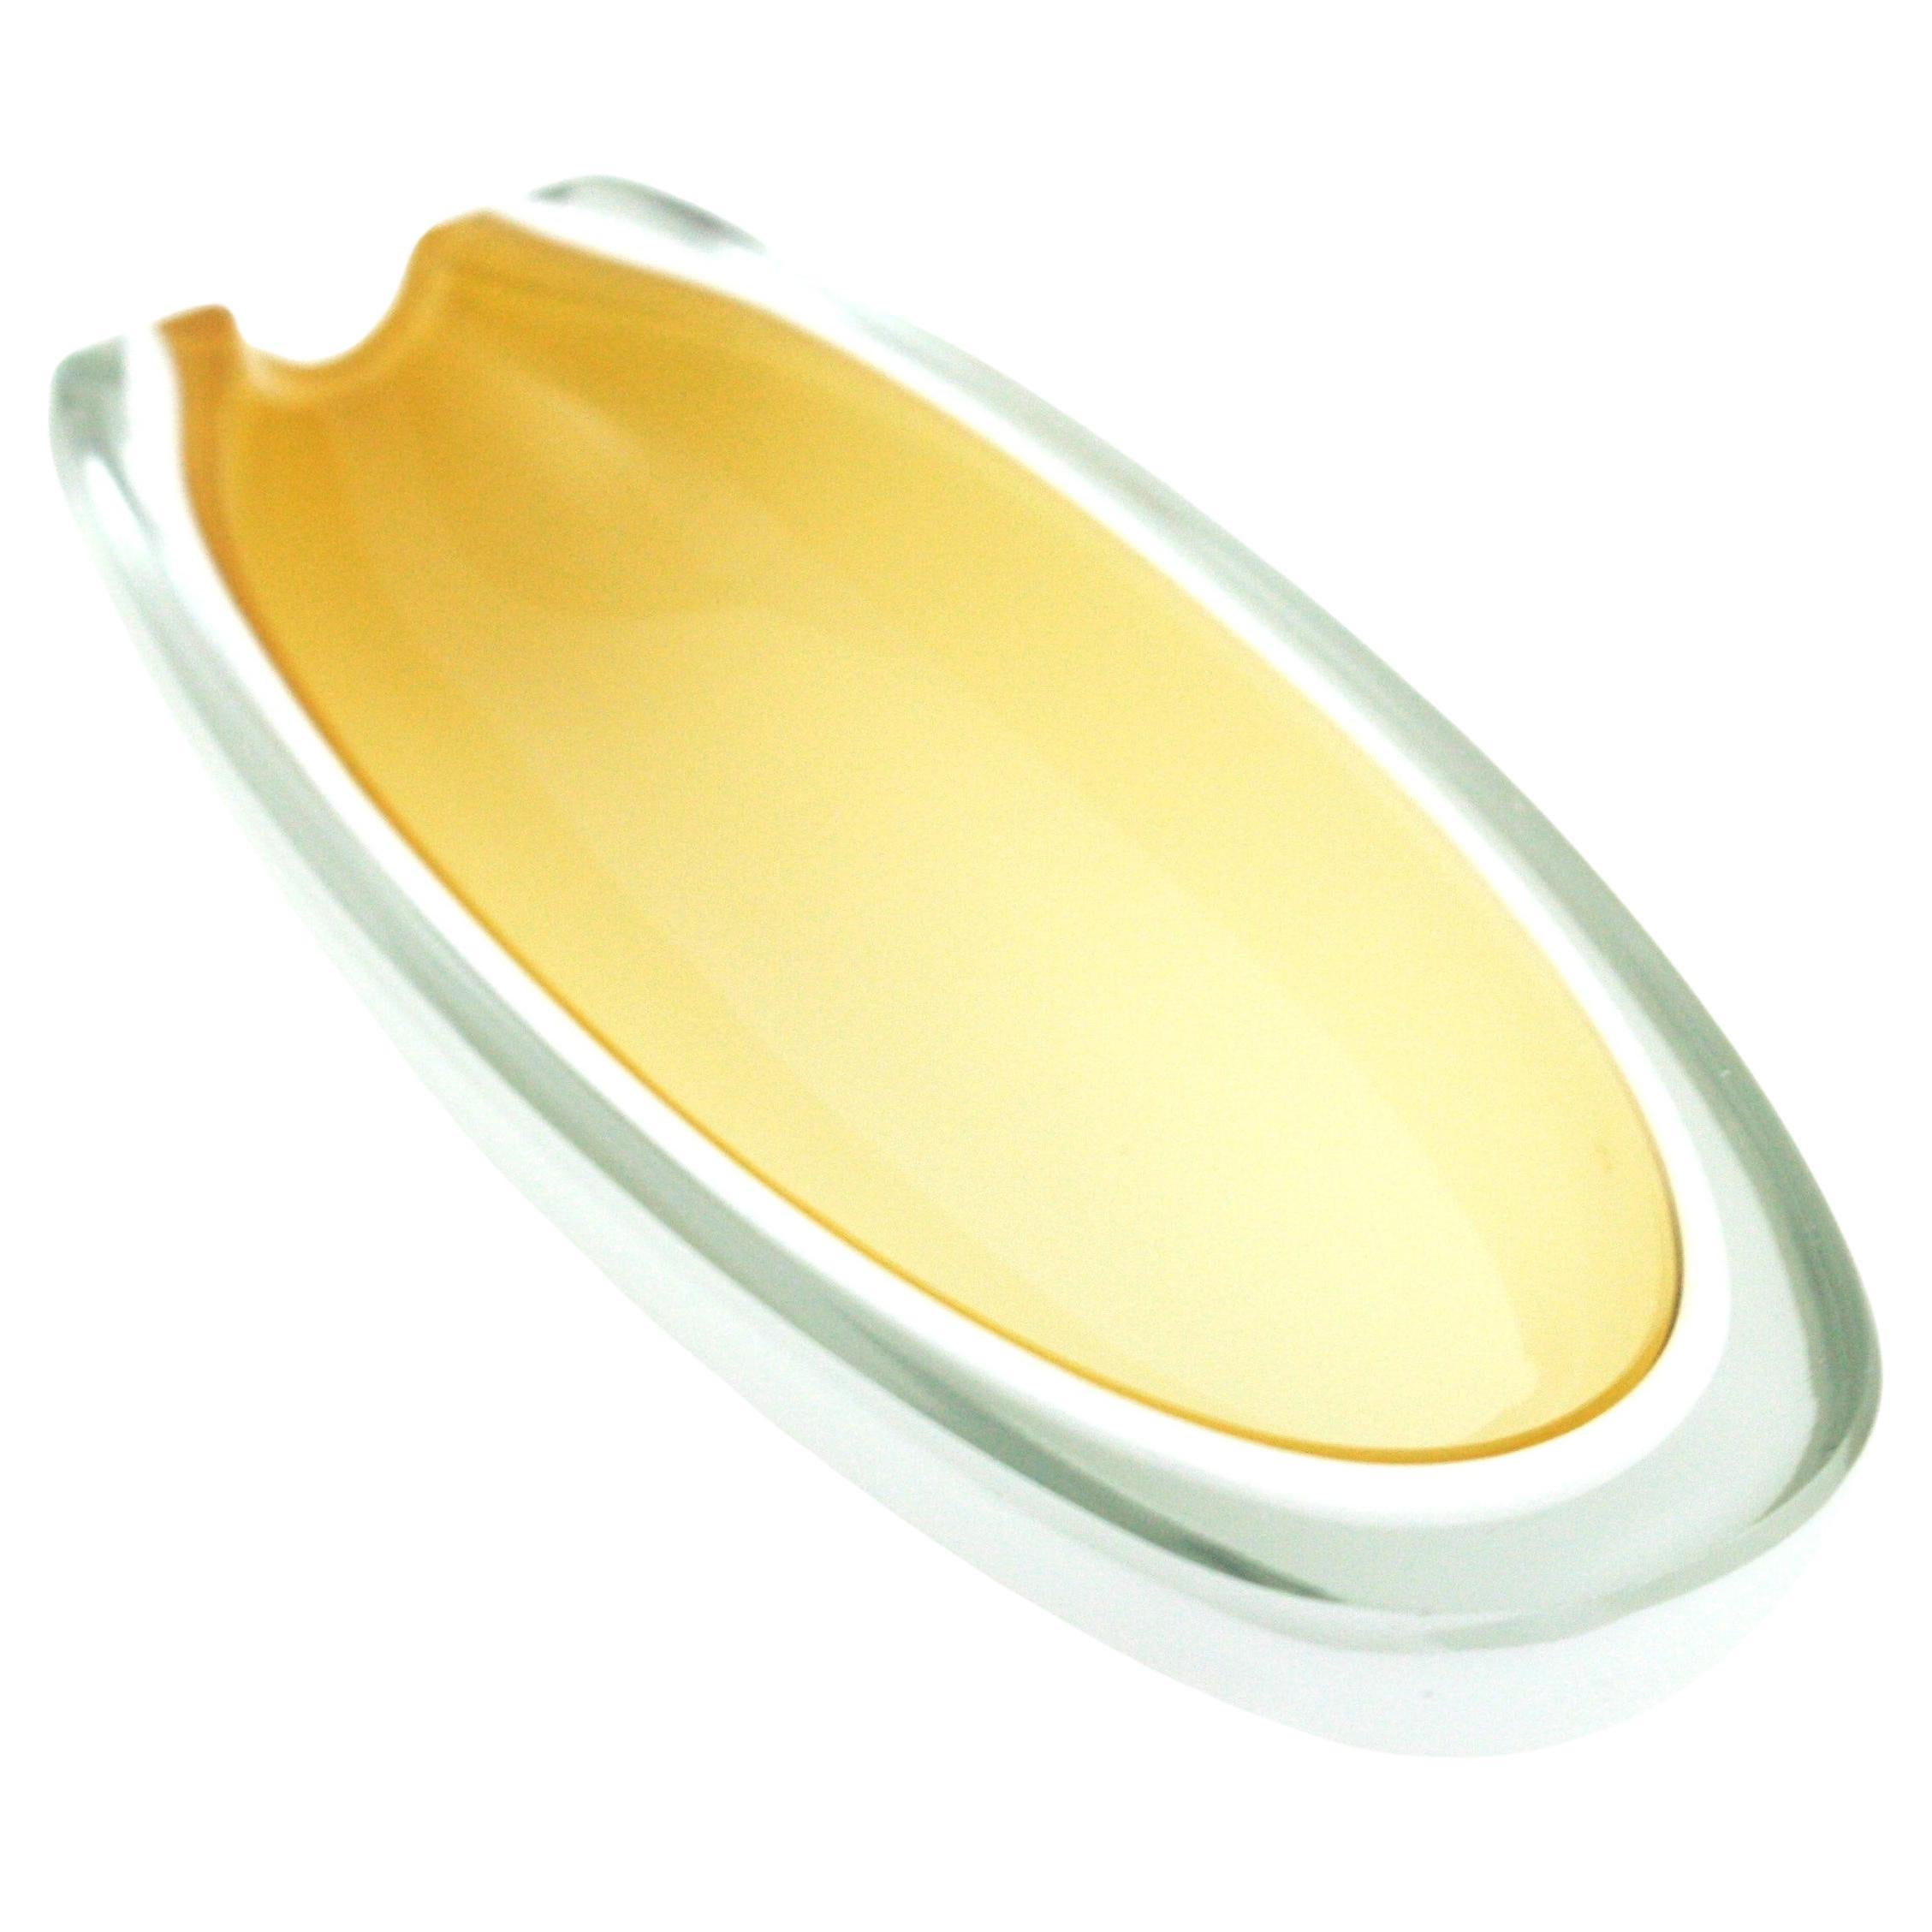 Archimede Seguso oval geode Murano glass Sommerso bowl / ashtray. Italy, 1950s-1960s.
Beautiful elongate shape with yellow and white alabastro glass cased into clear glass using the sommerso technique.
Flat cut top and flat cut side.
A layer of milk